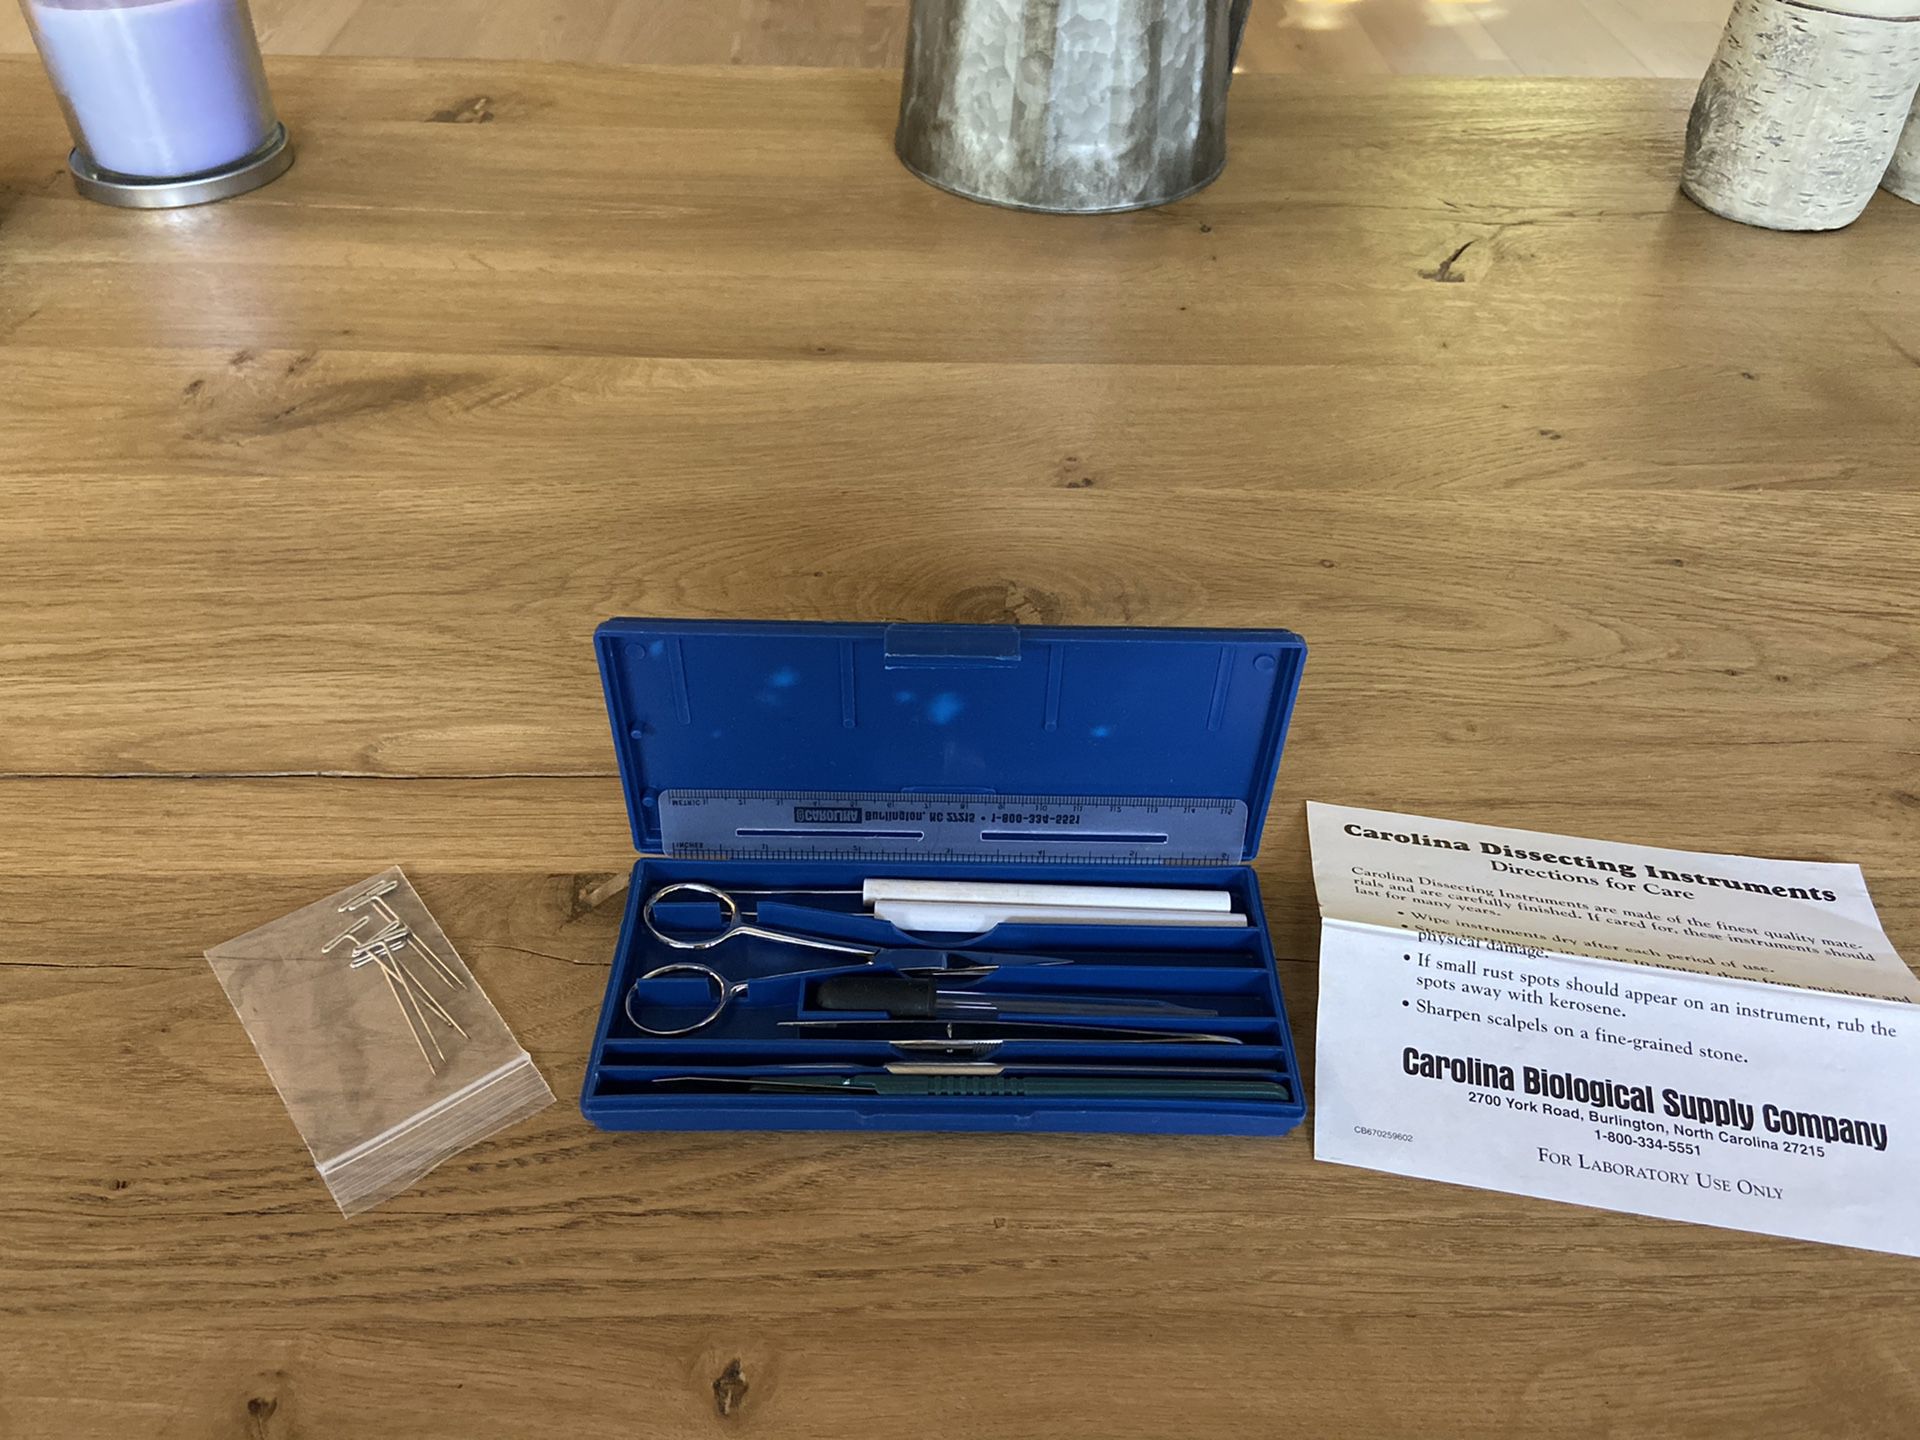 Biology student’s dissecting kit